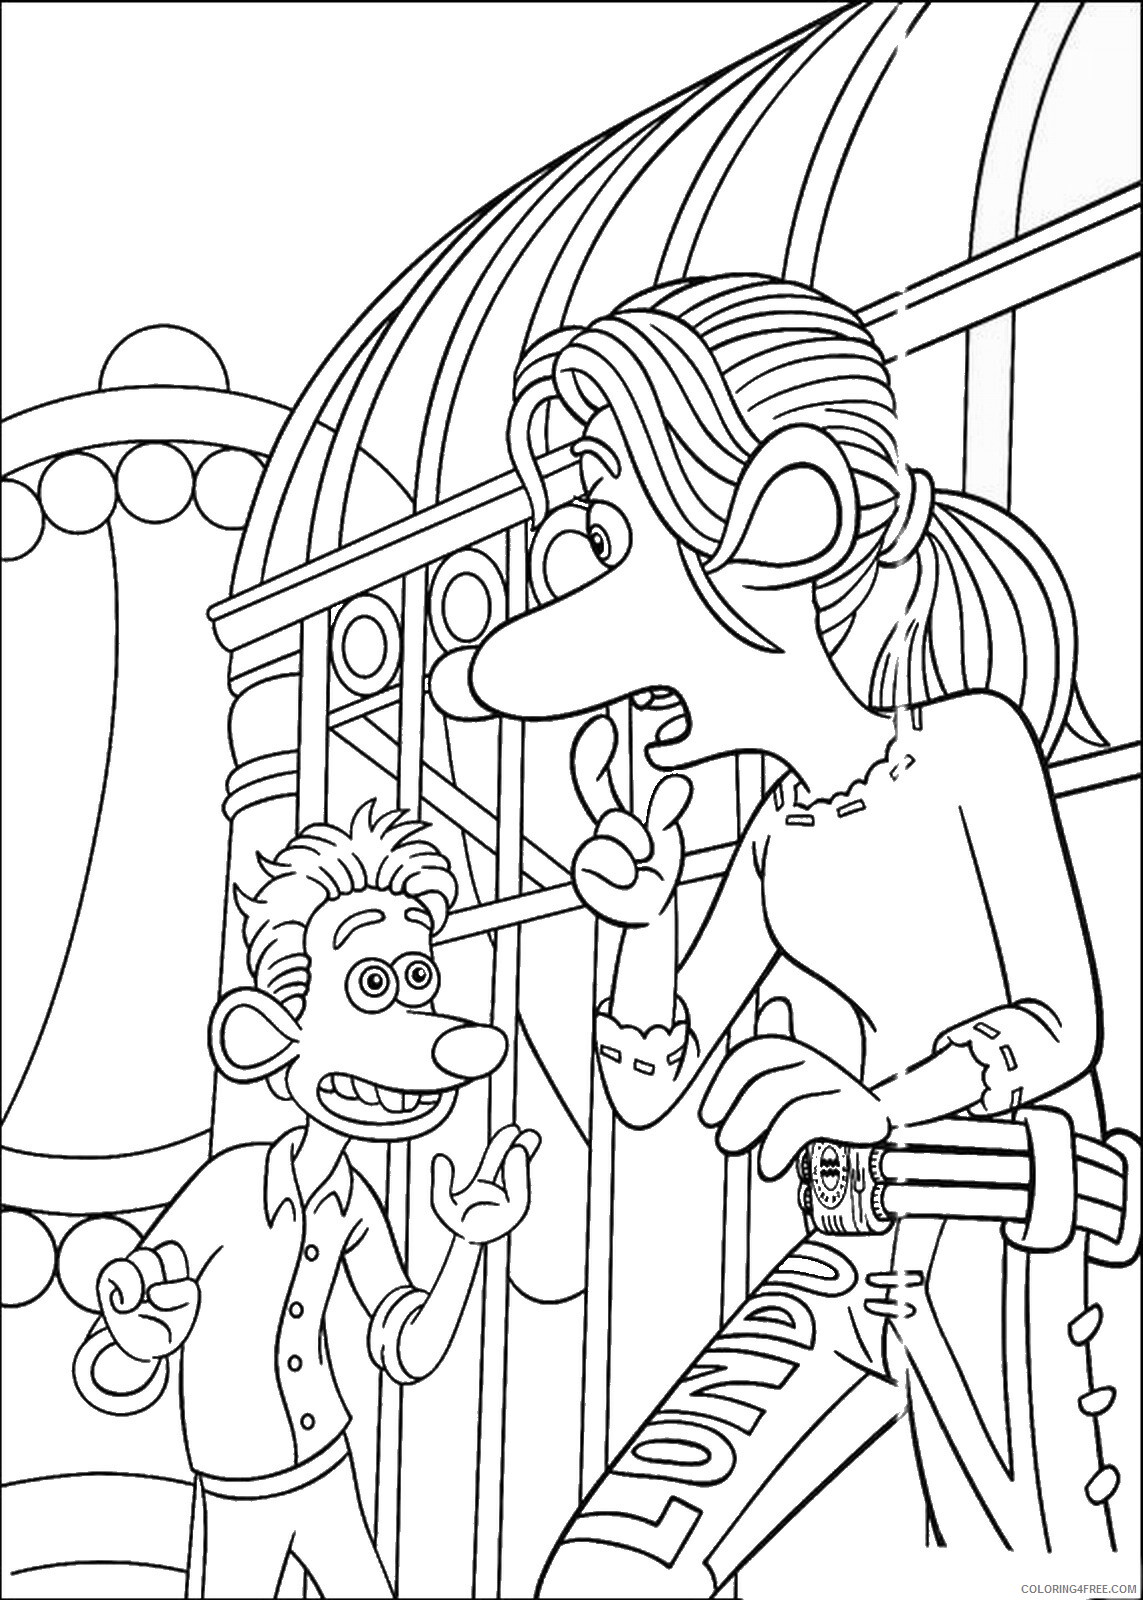 Flushed Away Coloring Pages TV Film flushed_cl_15 Printable 2020 02974 Coloring4free